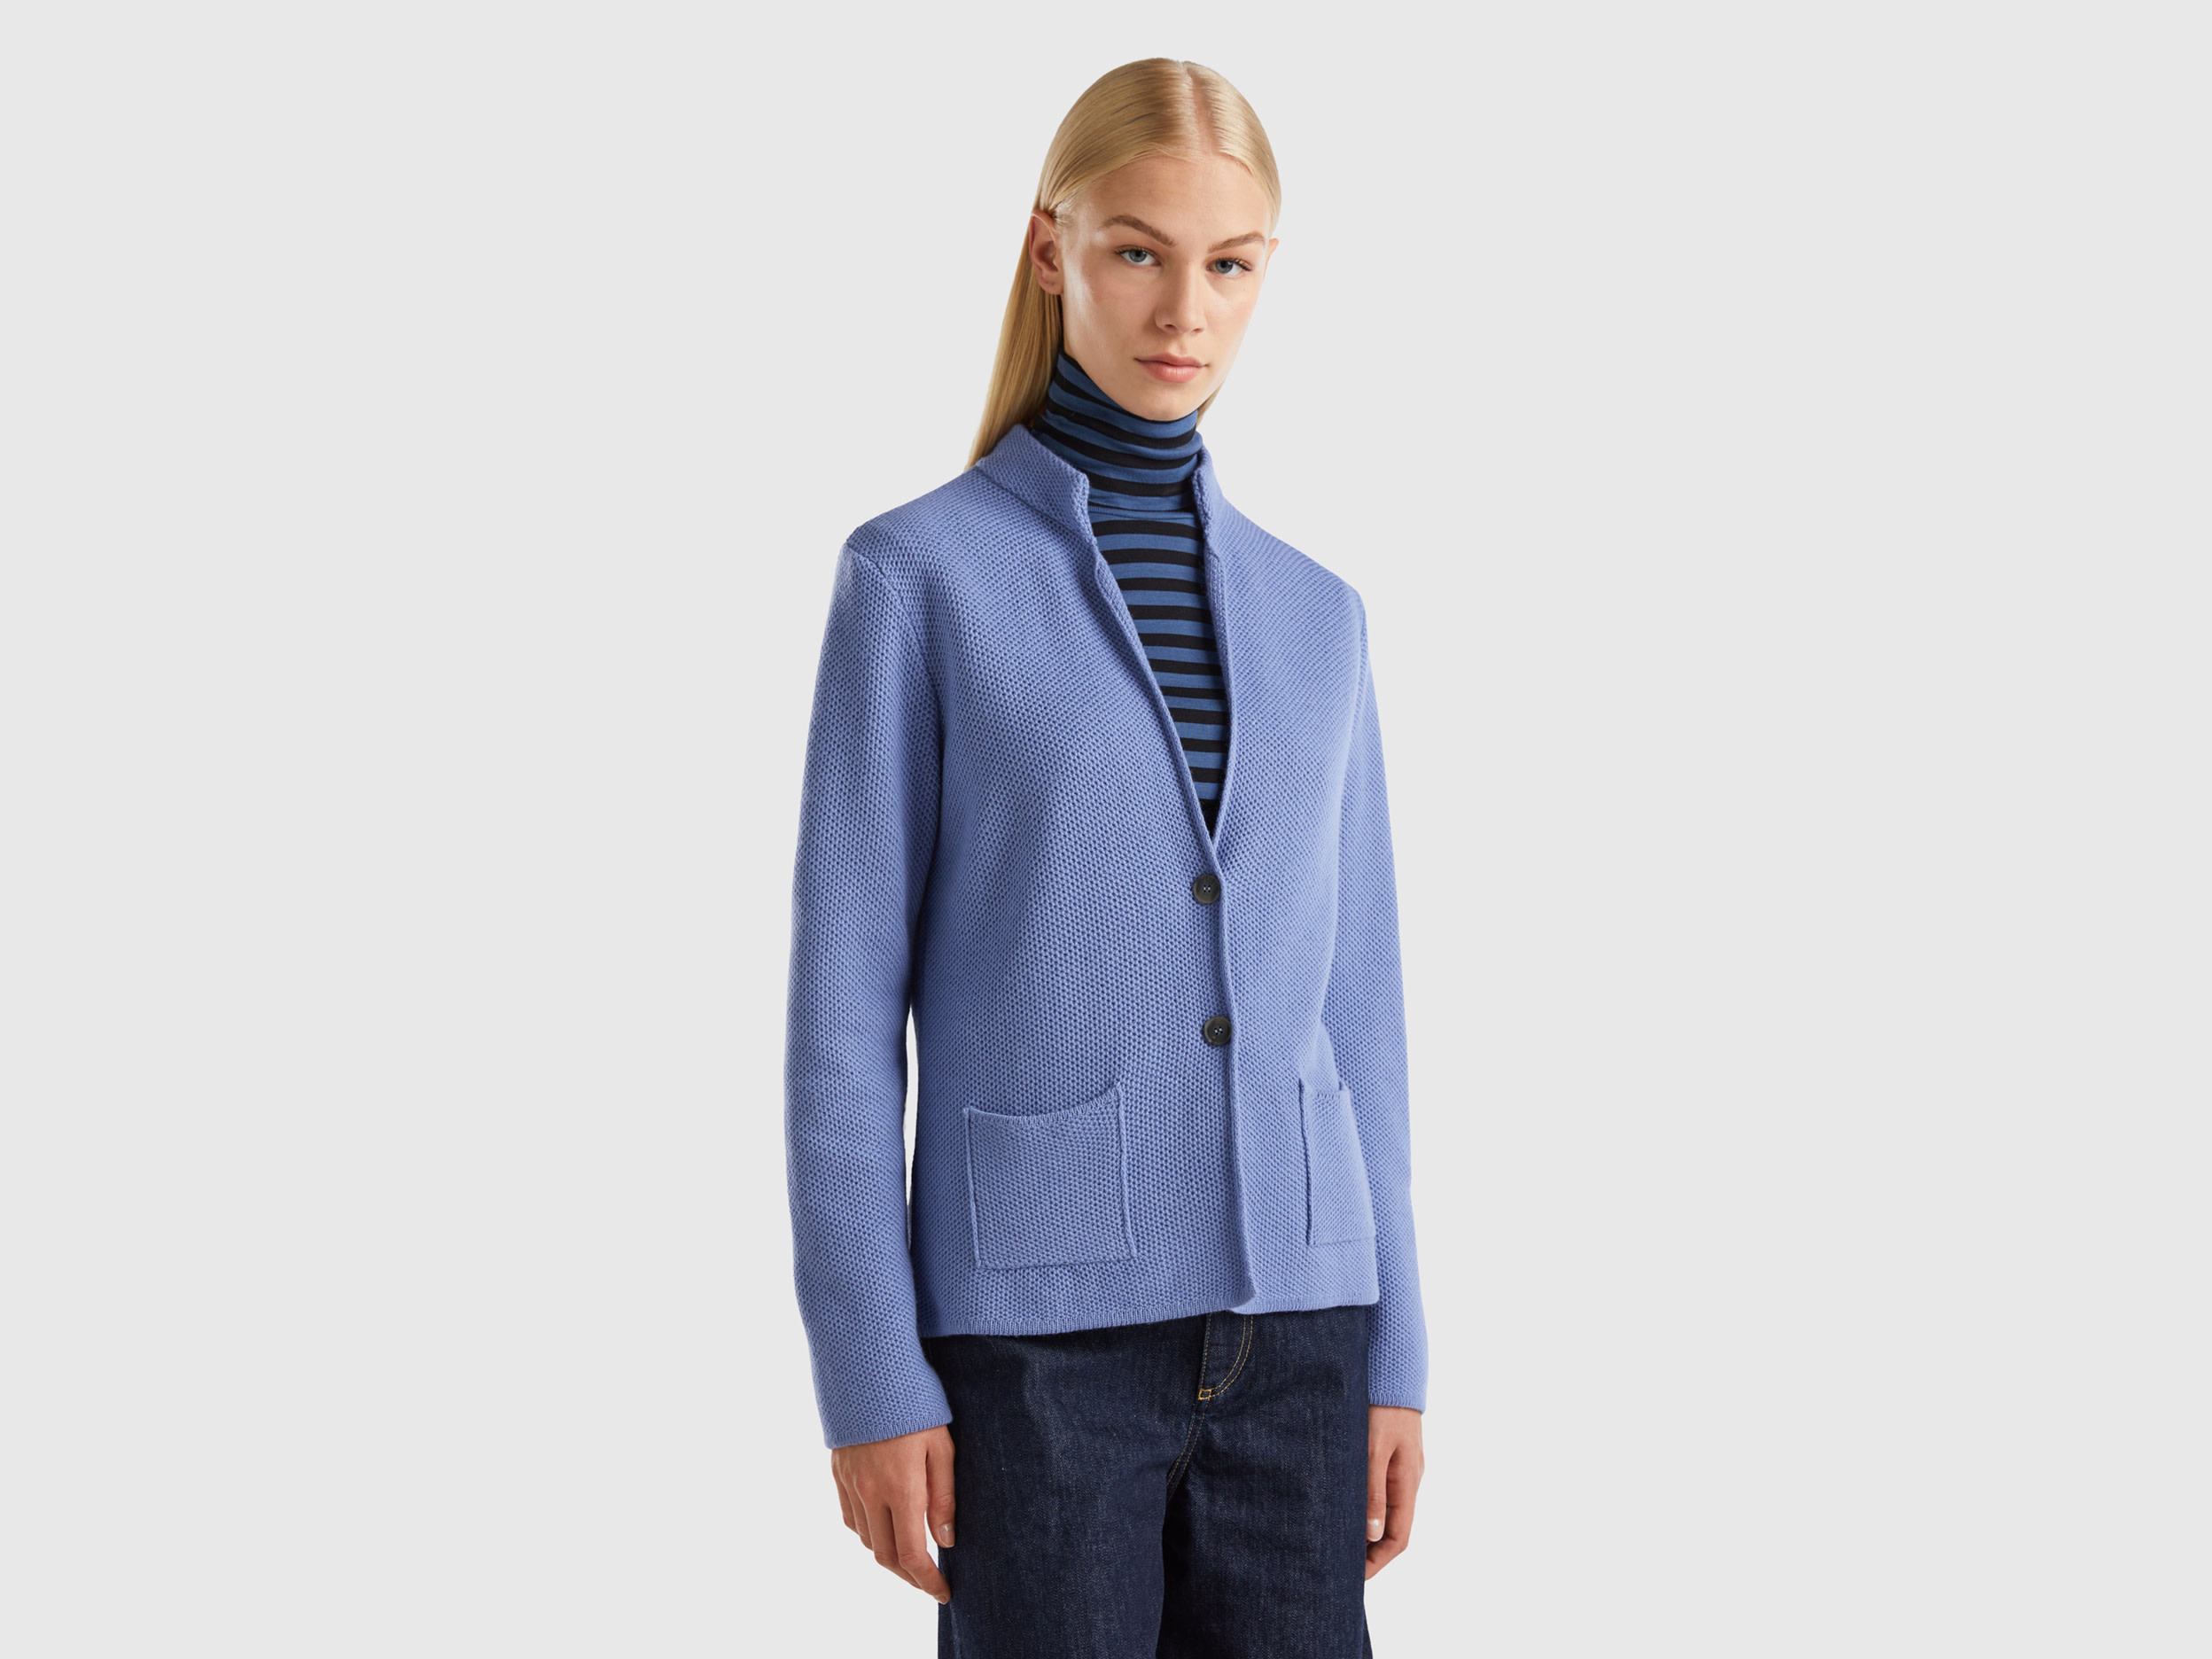 Benetton, Knit Jacket In Wool And Cashmere Blend, size L, Light Blue, Women